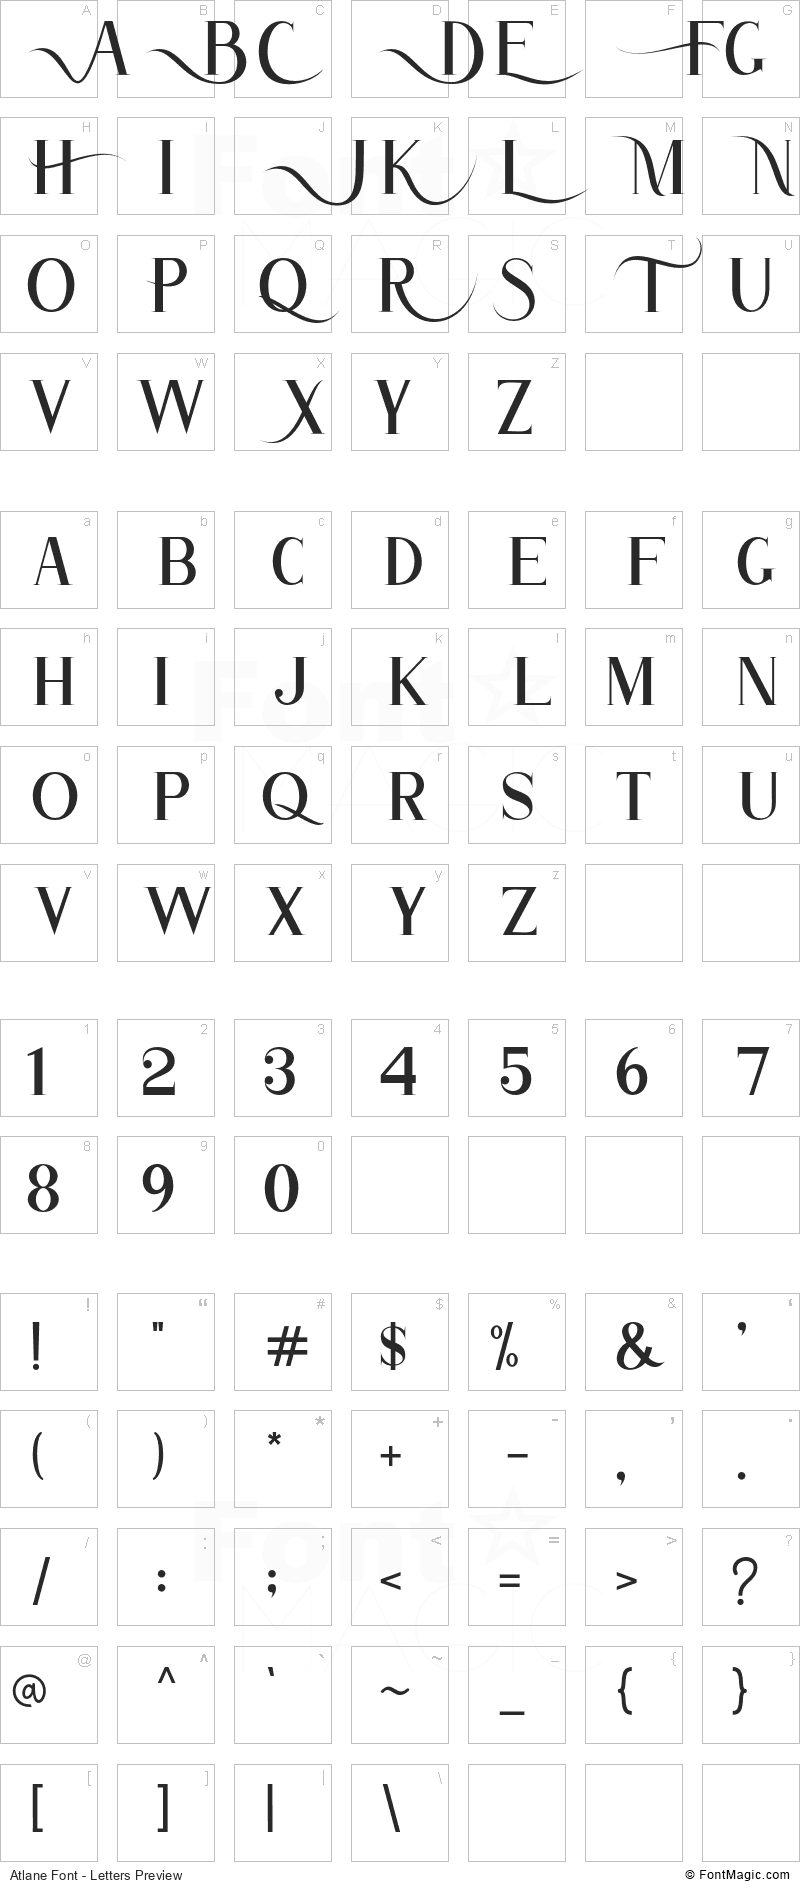 Atlane Font - All Latters Preview Chart